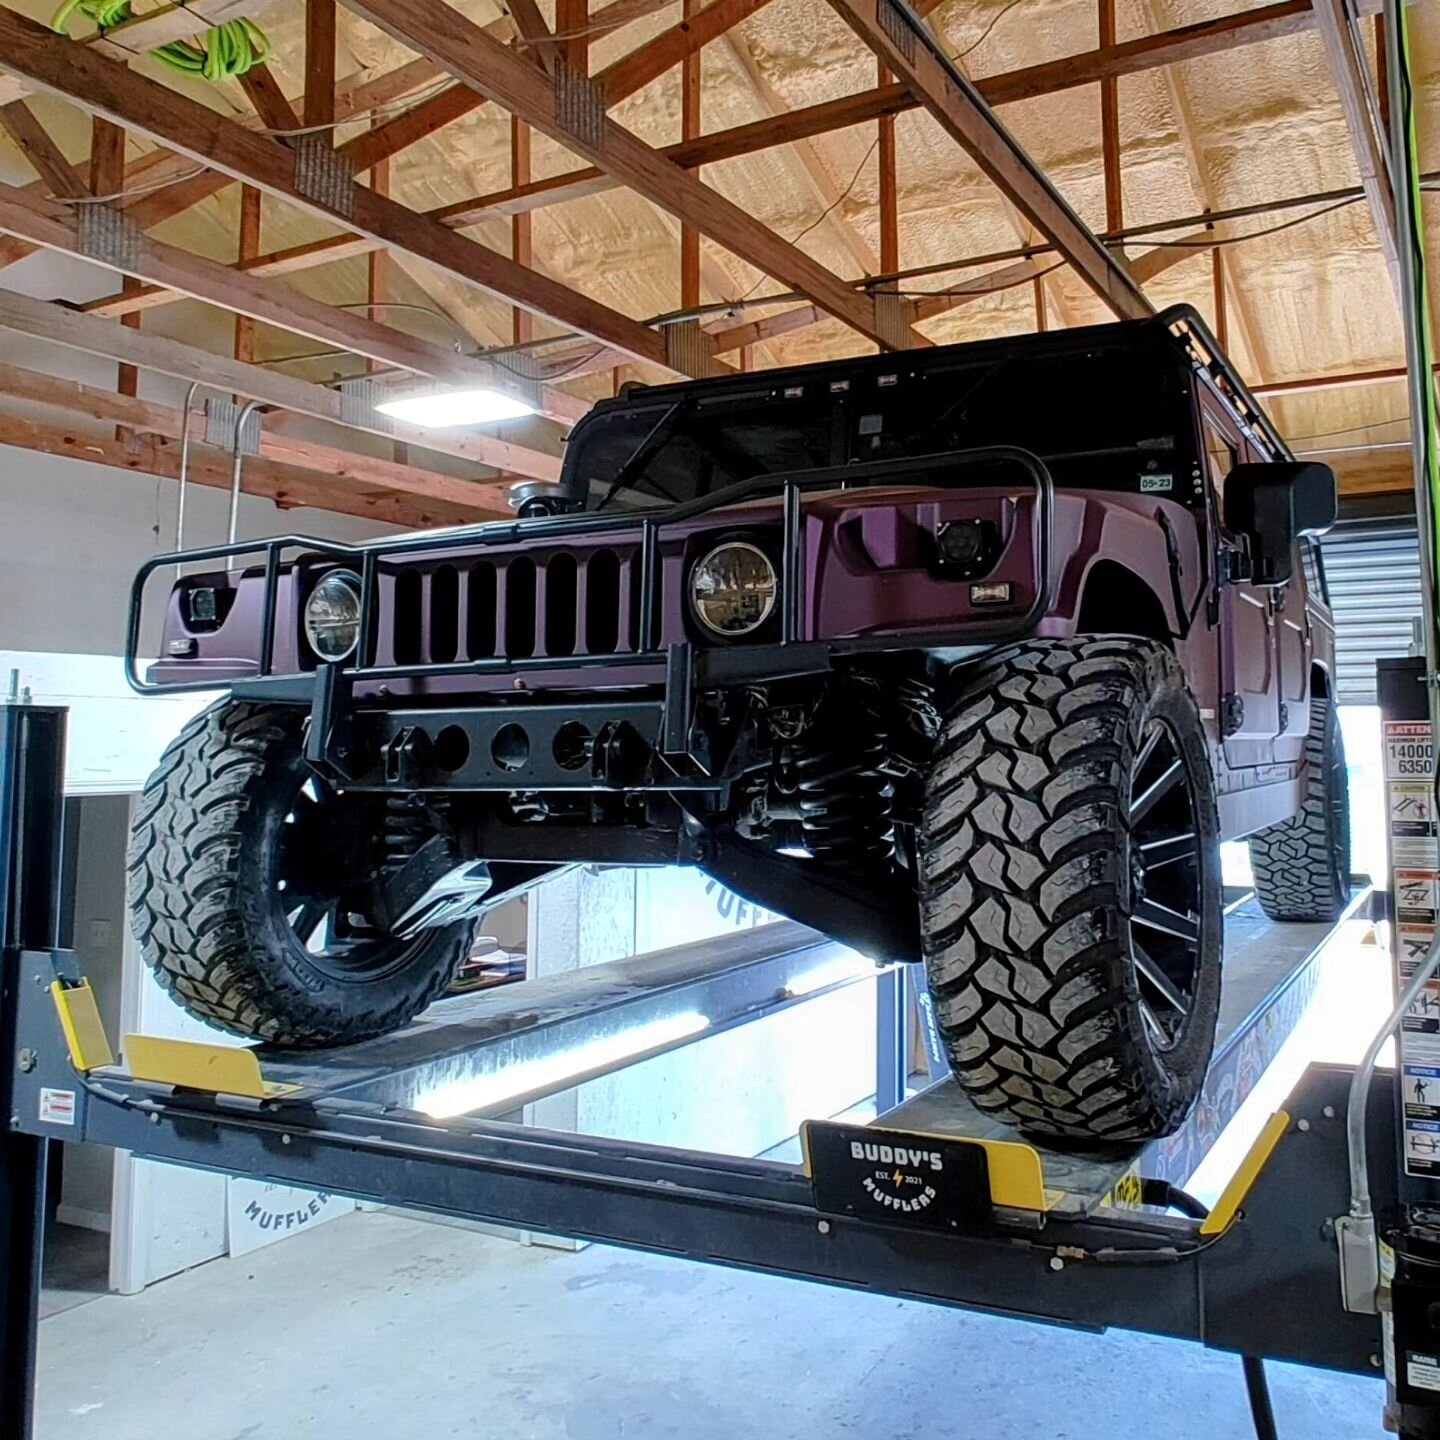 On the lift today we had a #Hummer #H1 in to add a #flopro #twister back in where a muffler was previously deleted. Still has a nice deep tone but way less crazy than straight pipe. 
Who's next?
#buddysmufflerstx

Check out the local car community. F